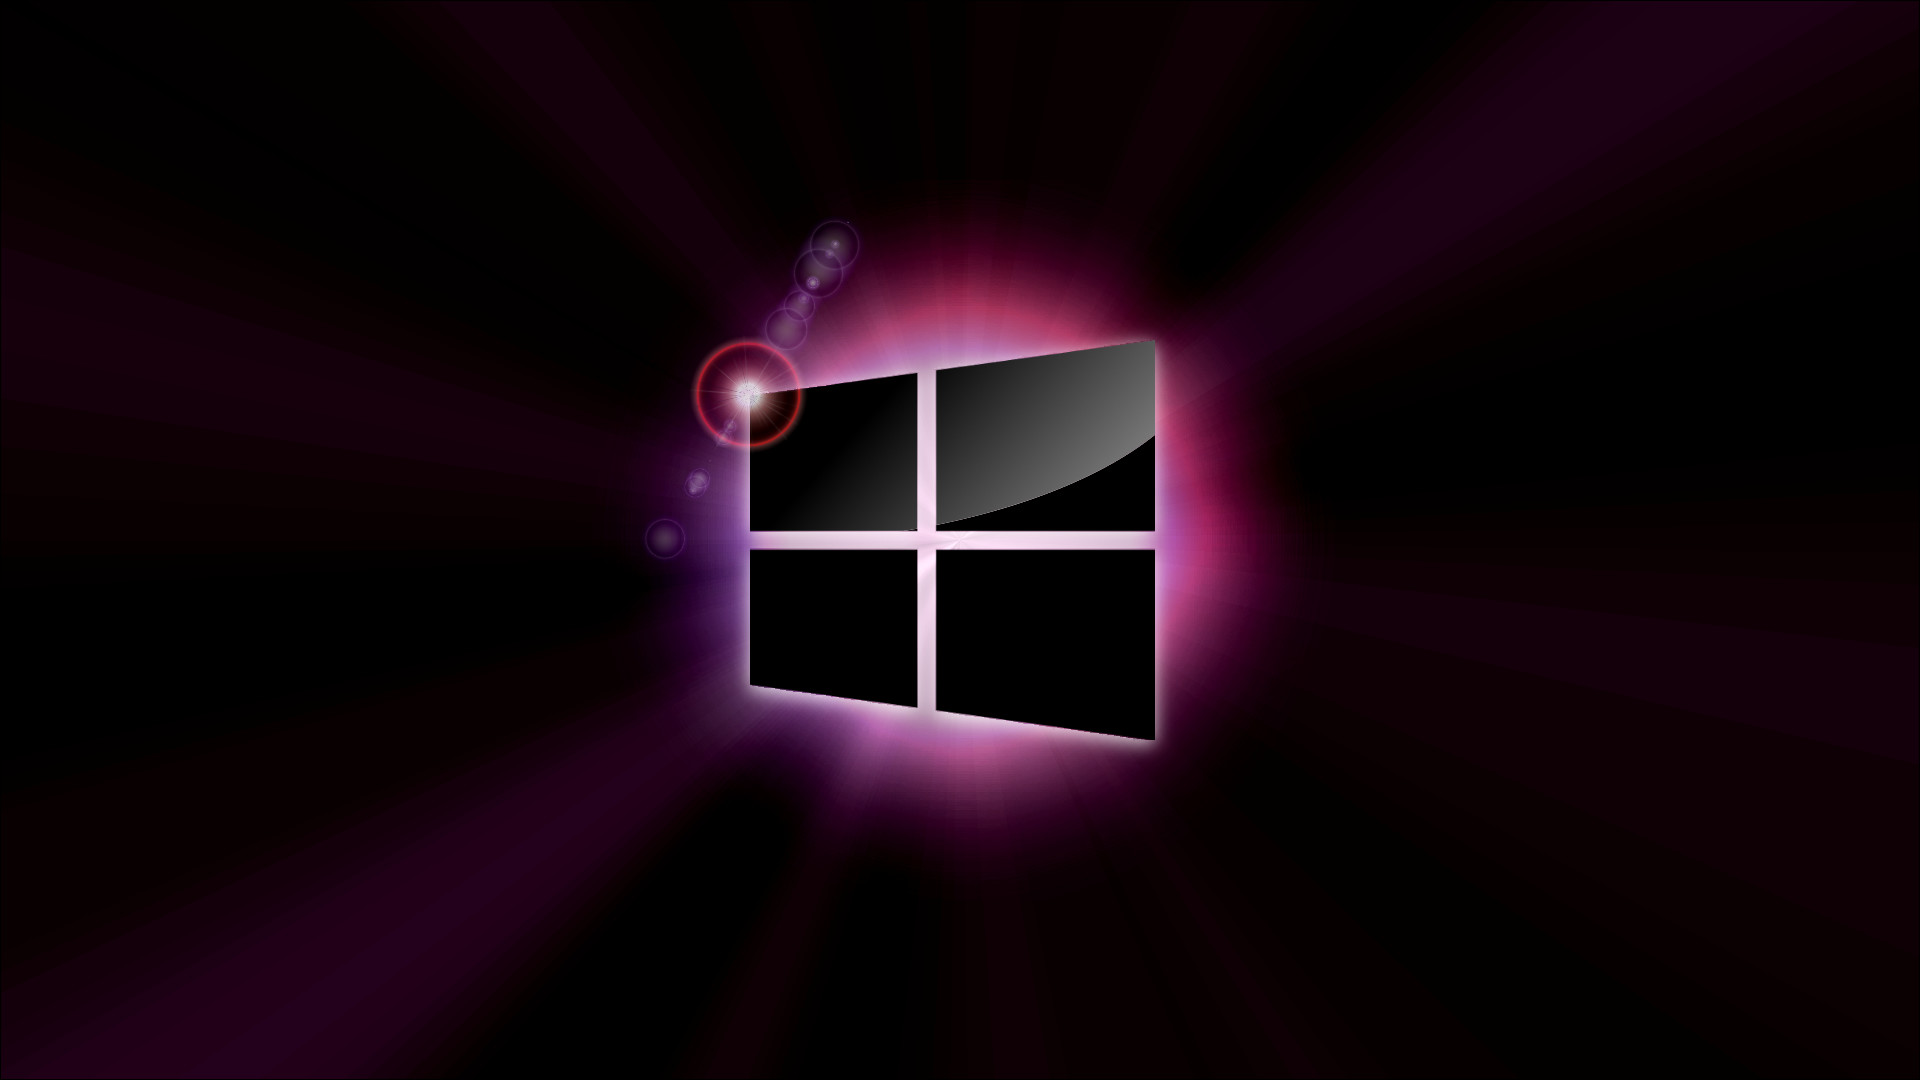 1920x1080 Awesome Windows 8 Wallpapers by Sean Francis #9